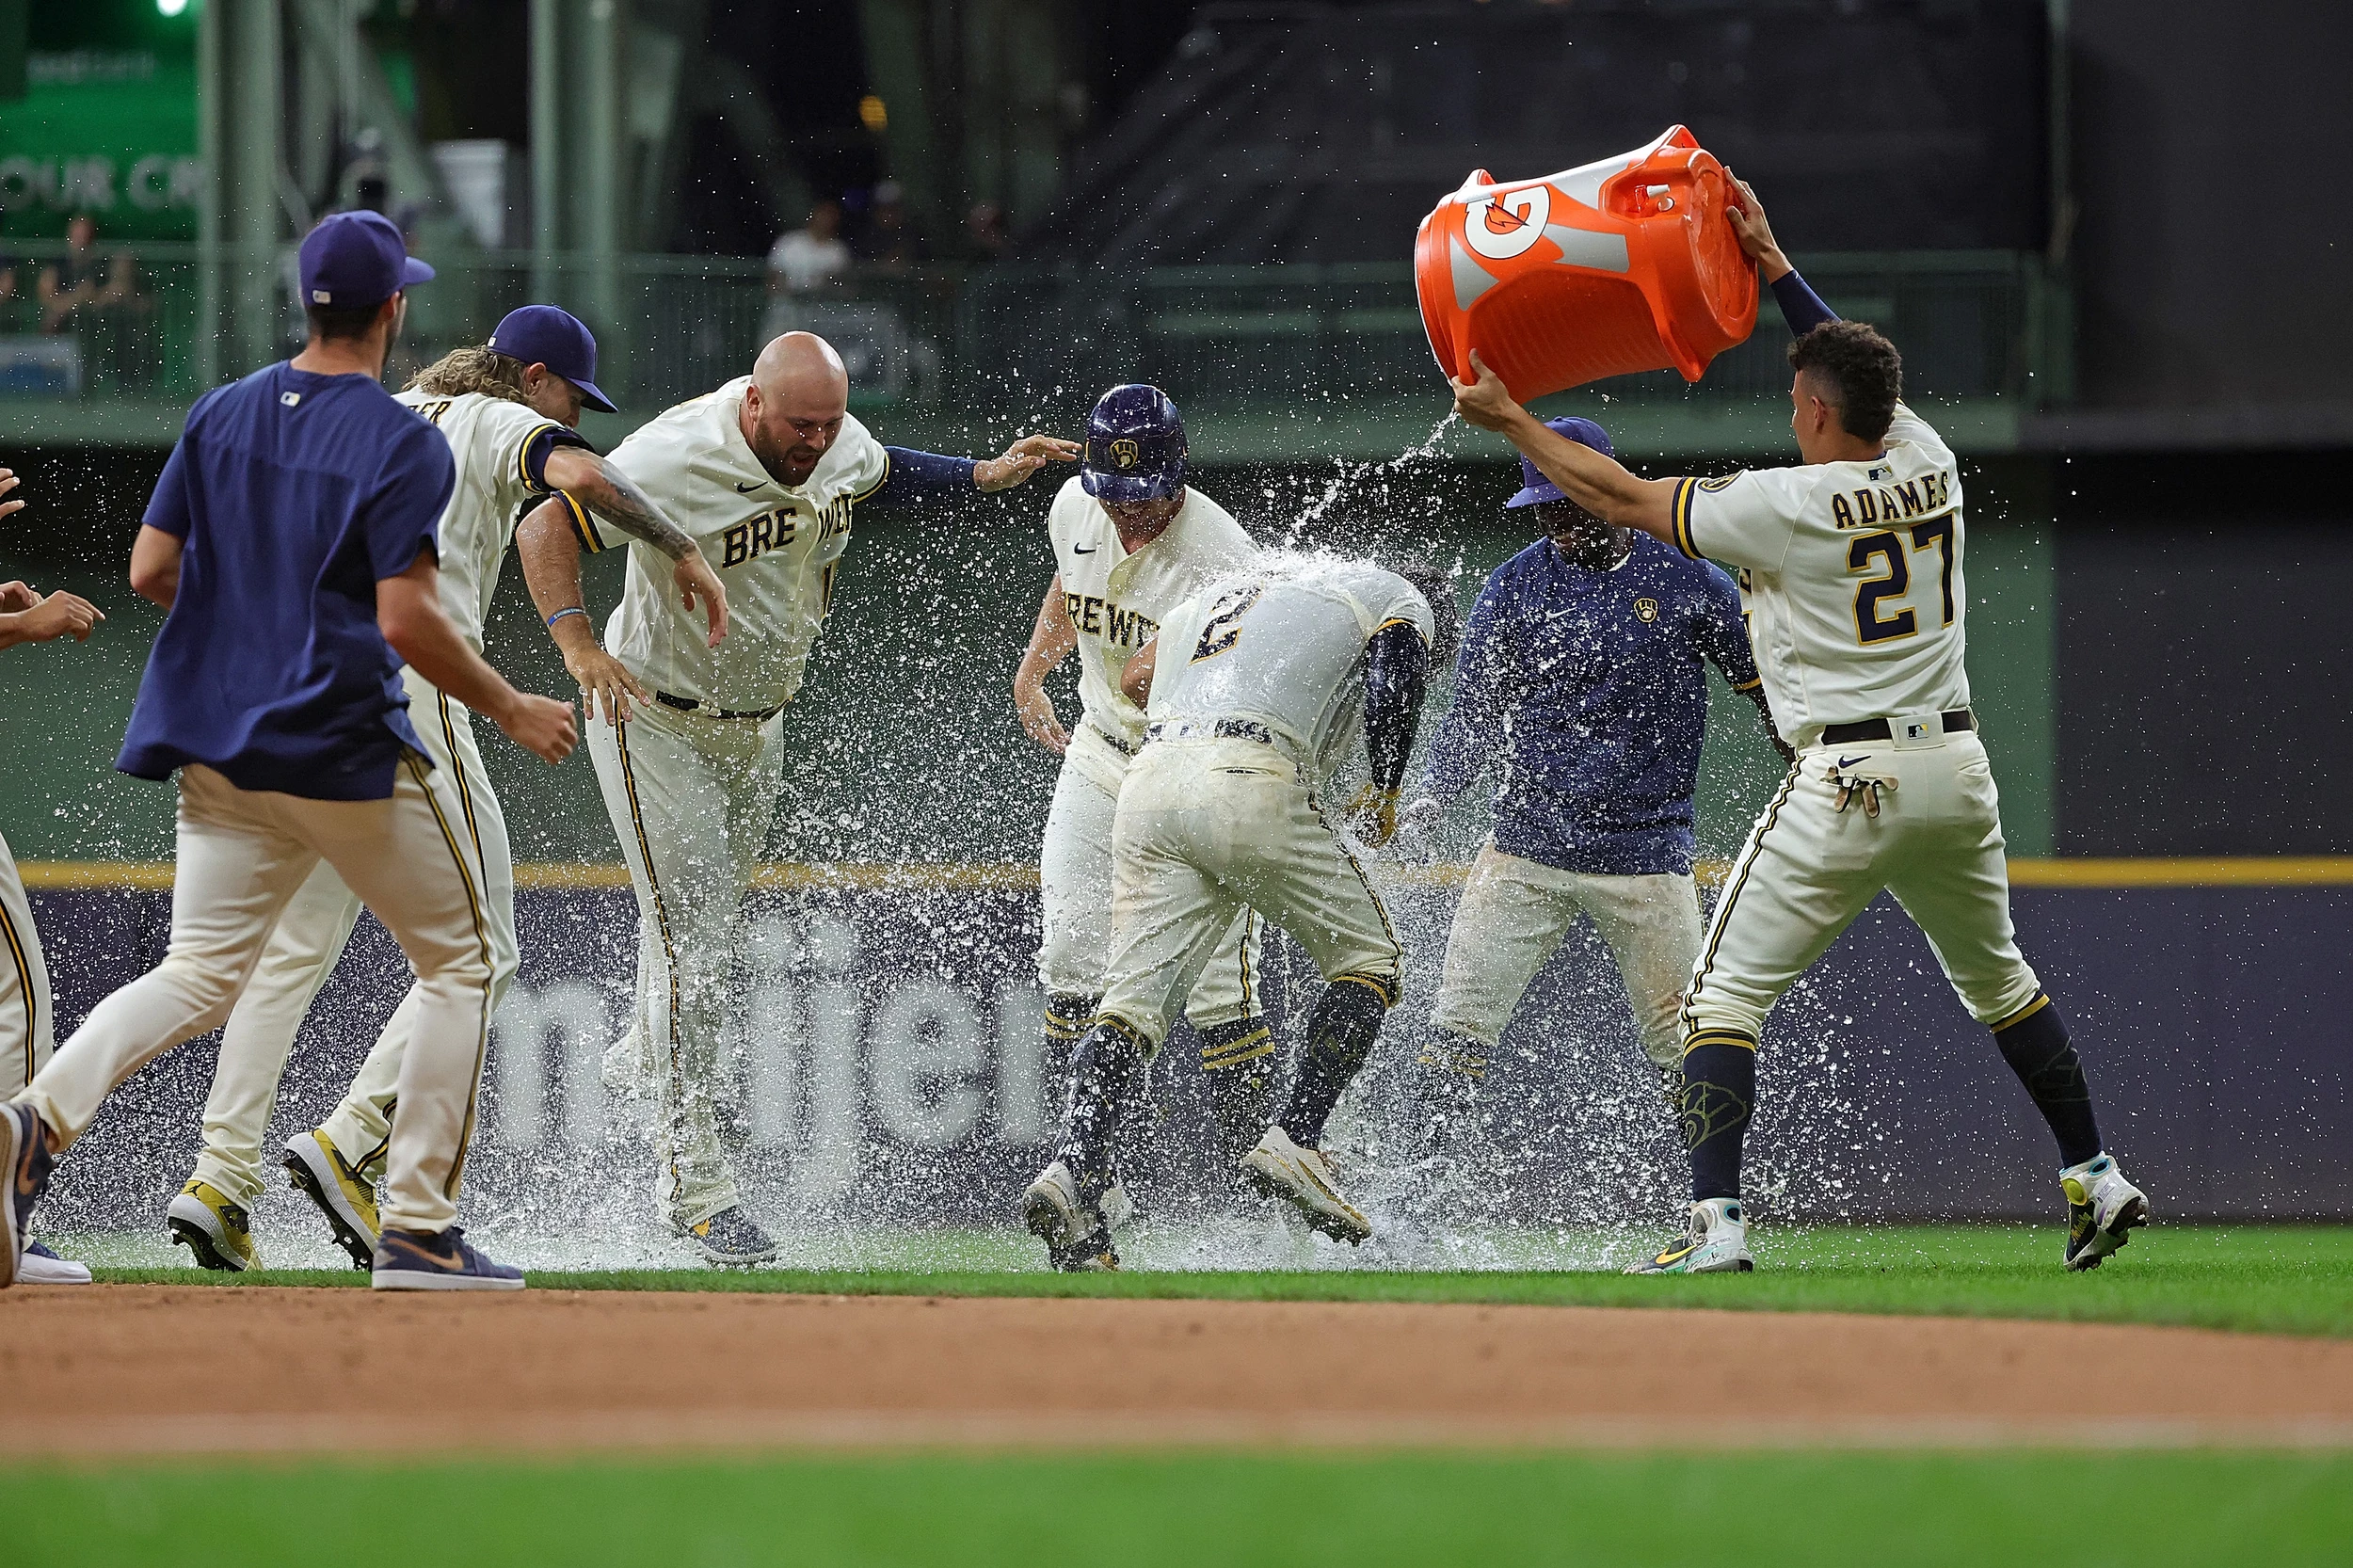 Brewers lose to Rockies, tie to Dodgers in split squad day - Brew Crew Ball